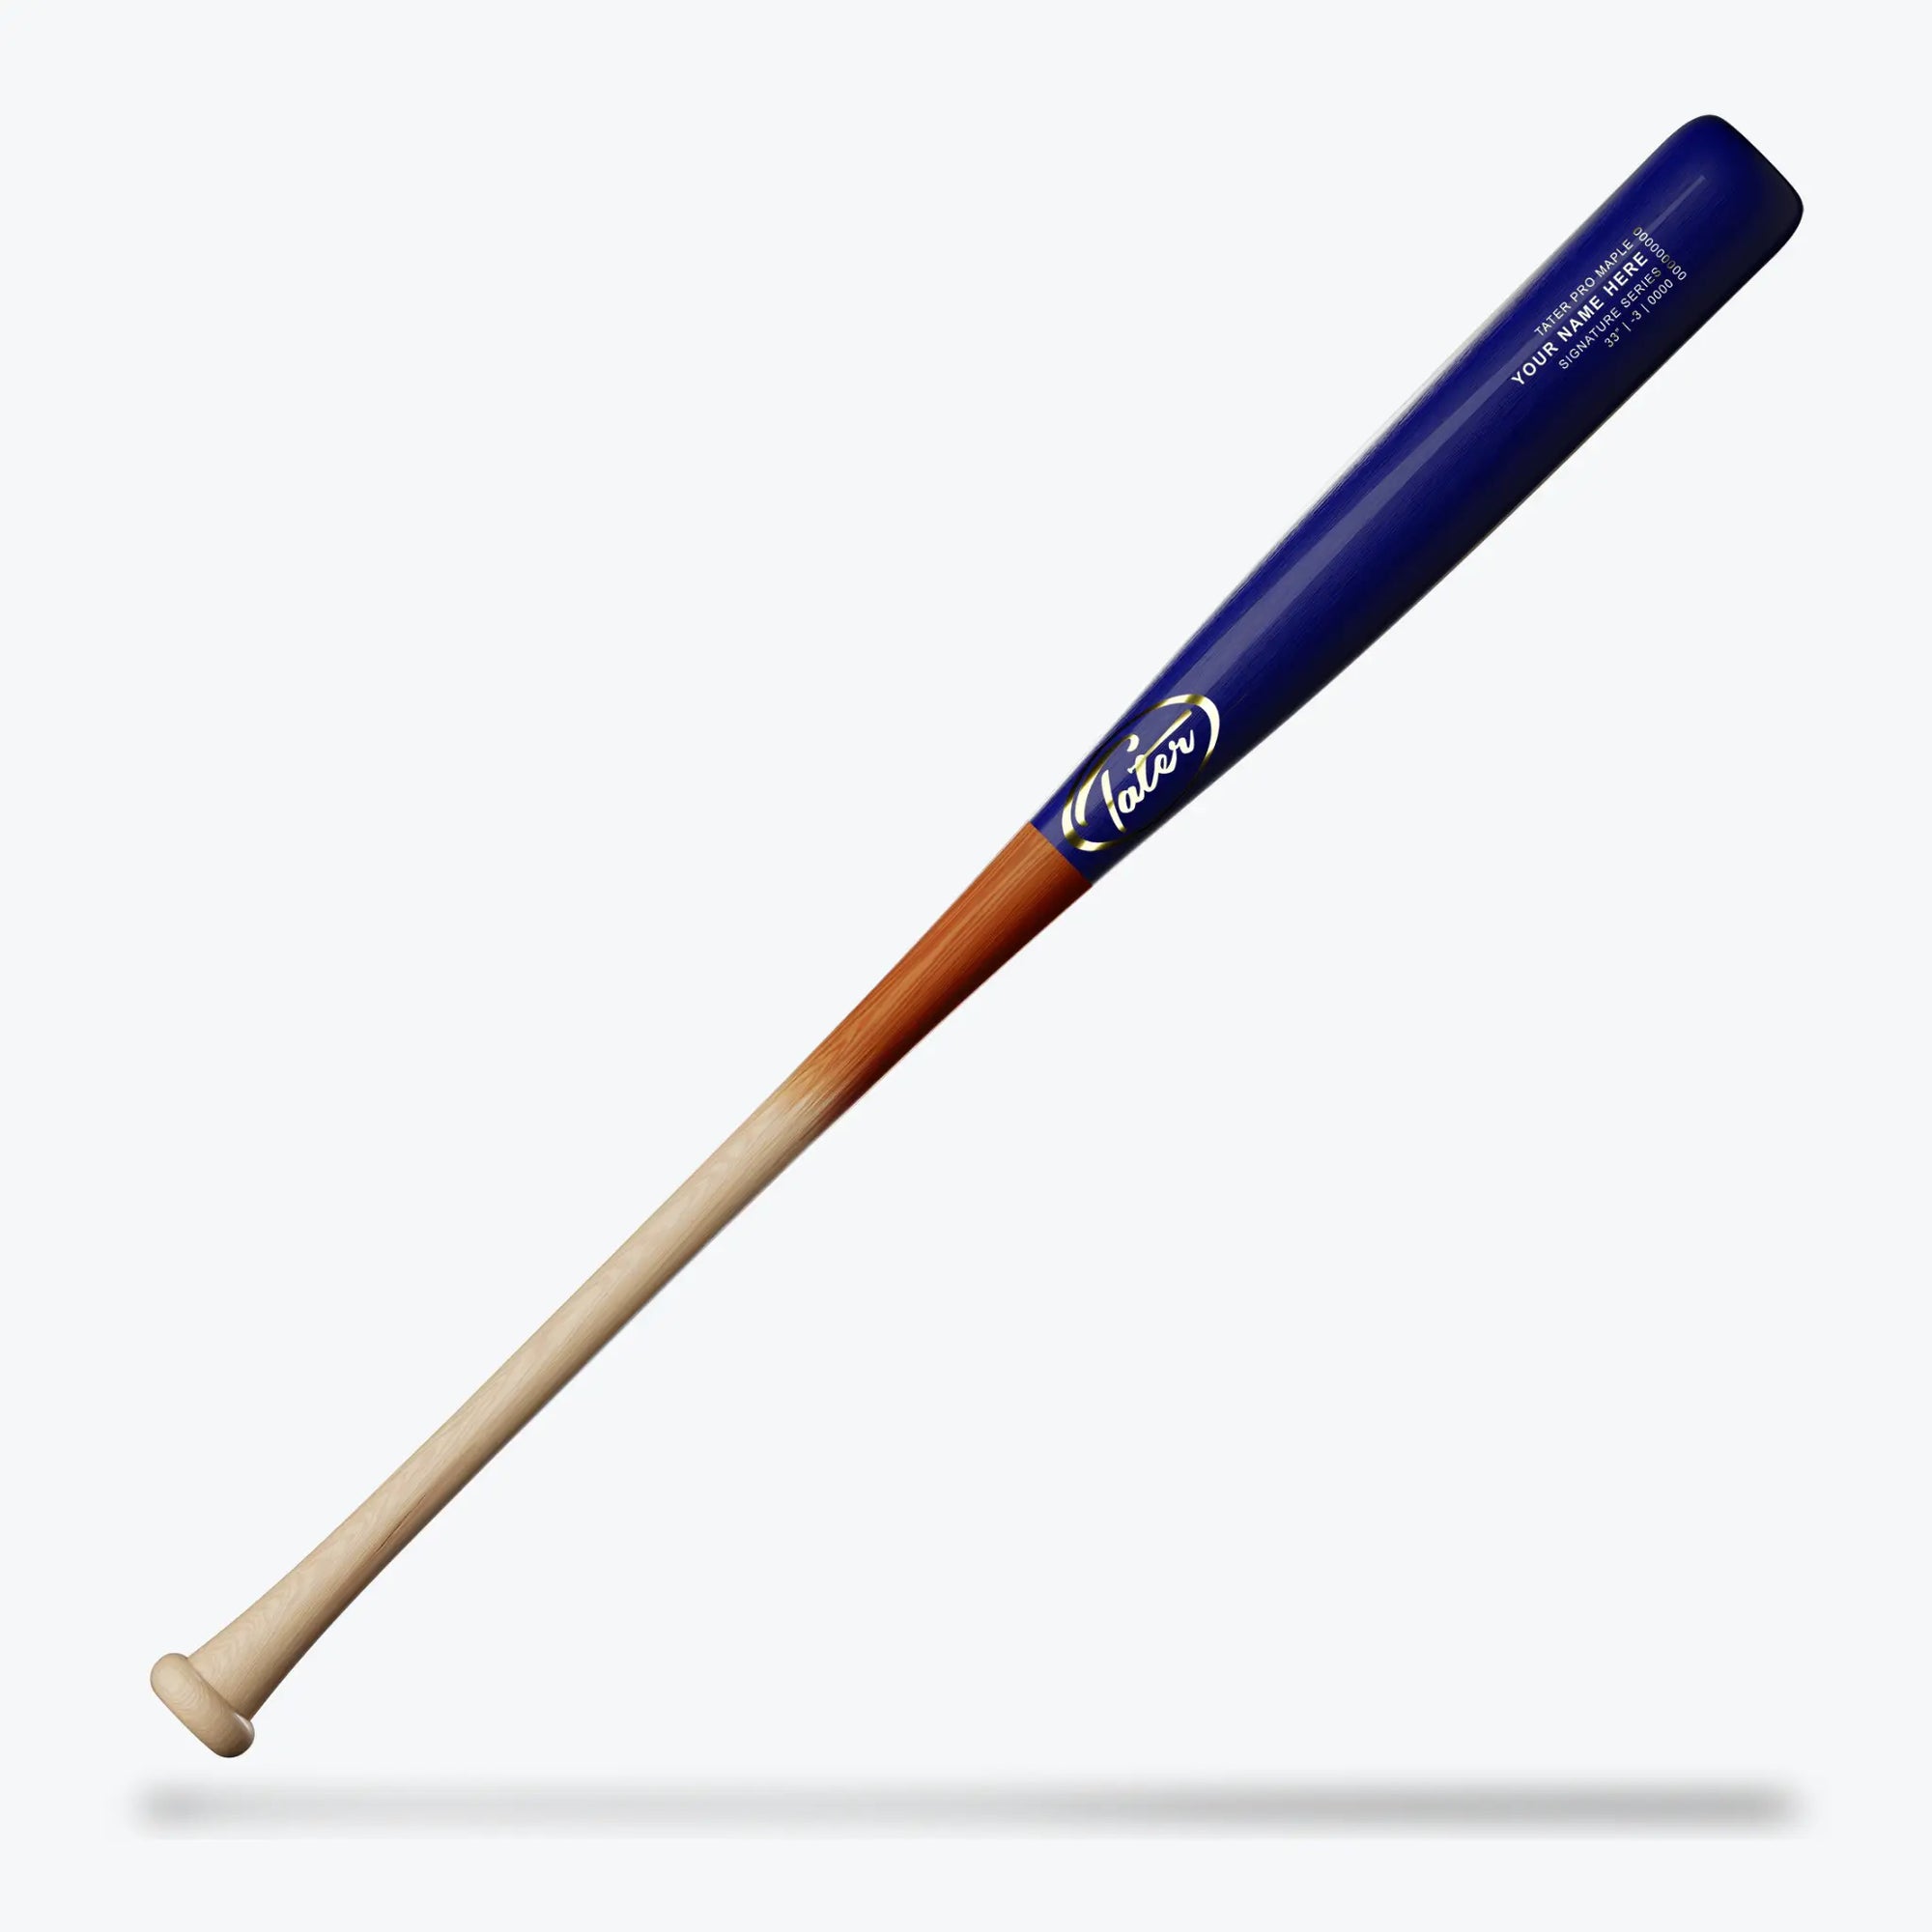 Captured here is the Tater X6 wood bat, designed for high school and collegiate players. It features a deep blue barrel that transitions to a natural wood color towards the traditional knob. With a slight end-load and a drop-3 weight in 31, 32, or 33 inches, it's built for the competitive player looking for that extra power edge.